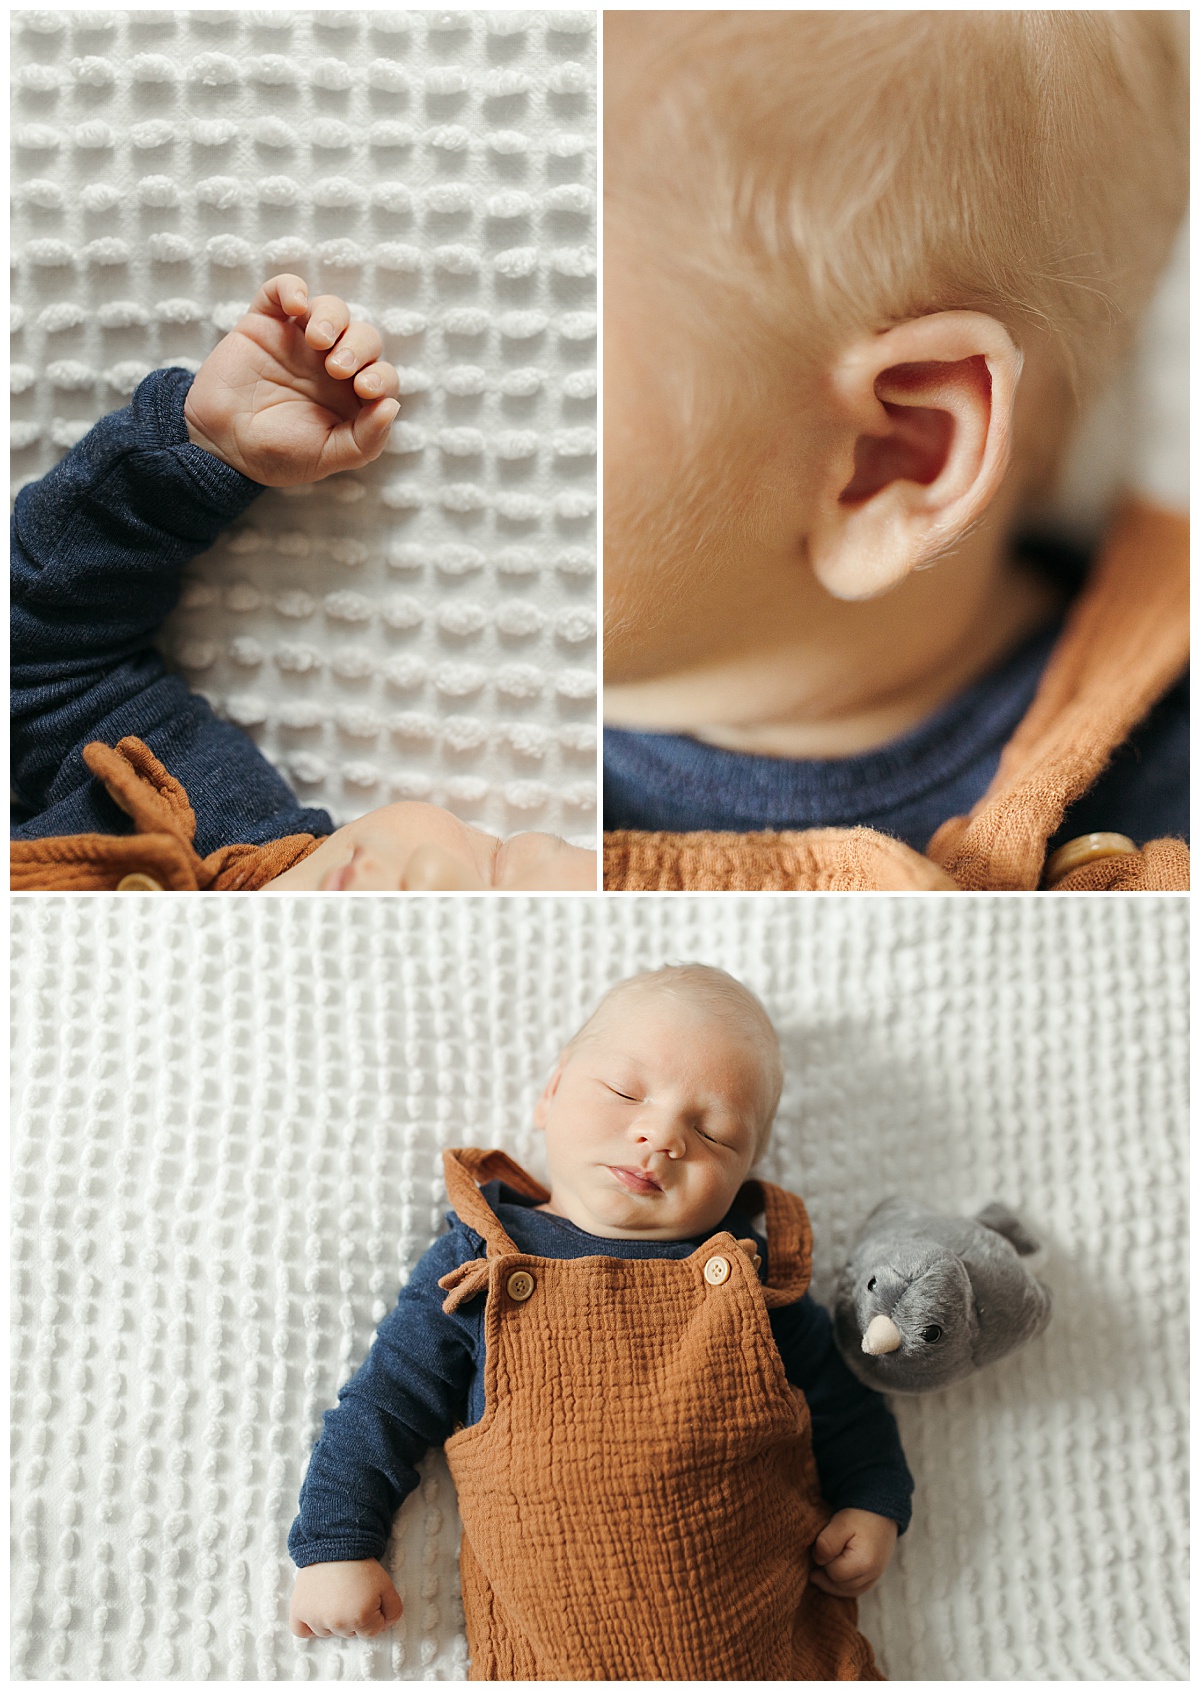 tiny details of hands, ears, and face captured during Heartwarming In-Home Newborn Session